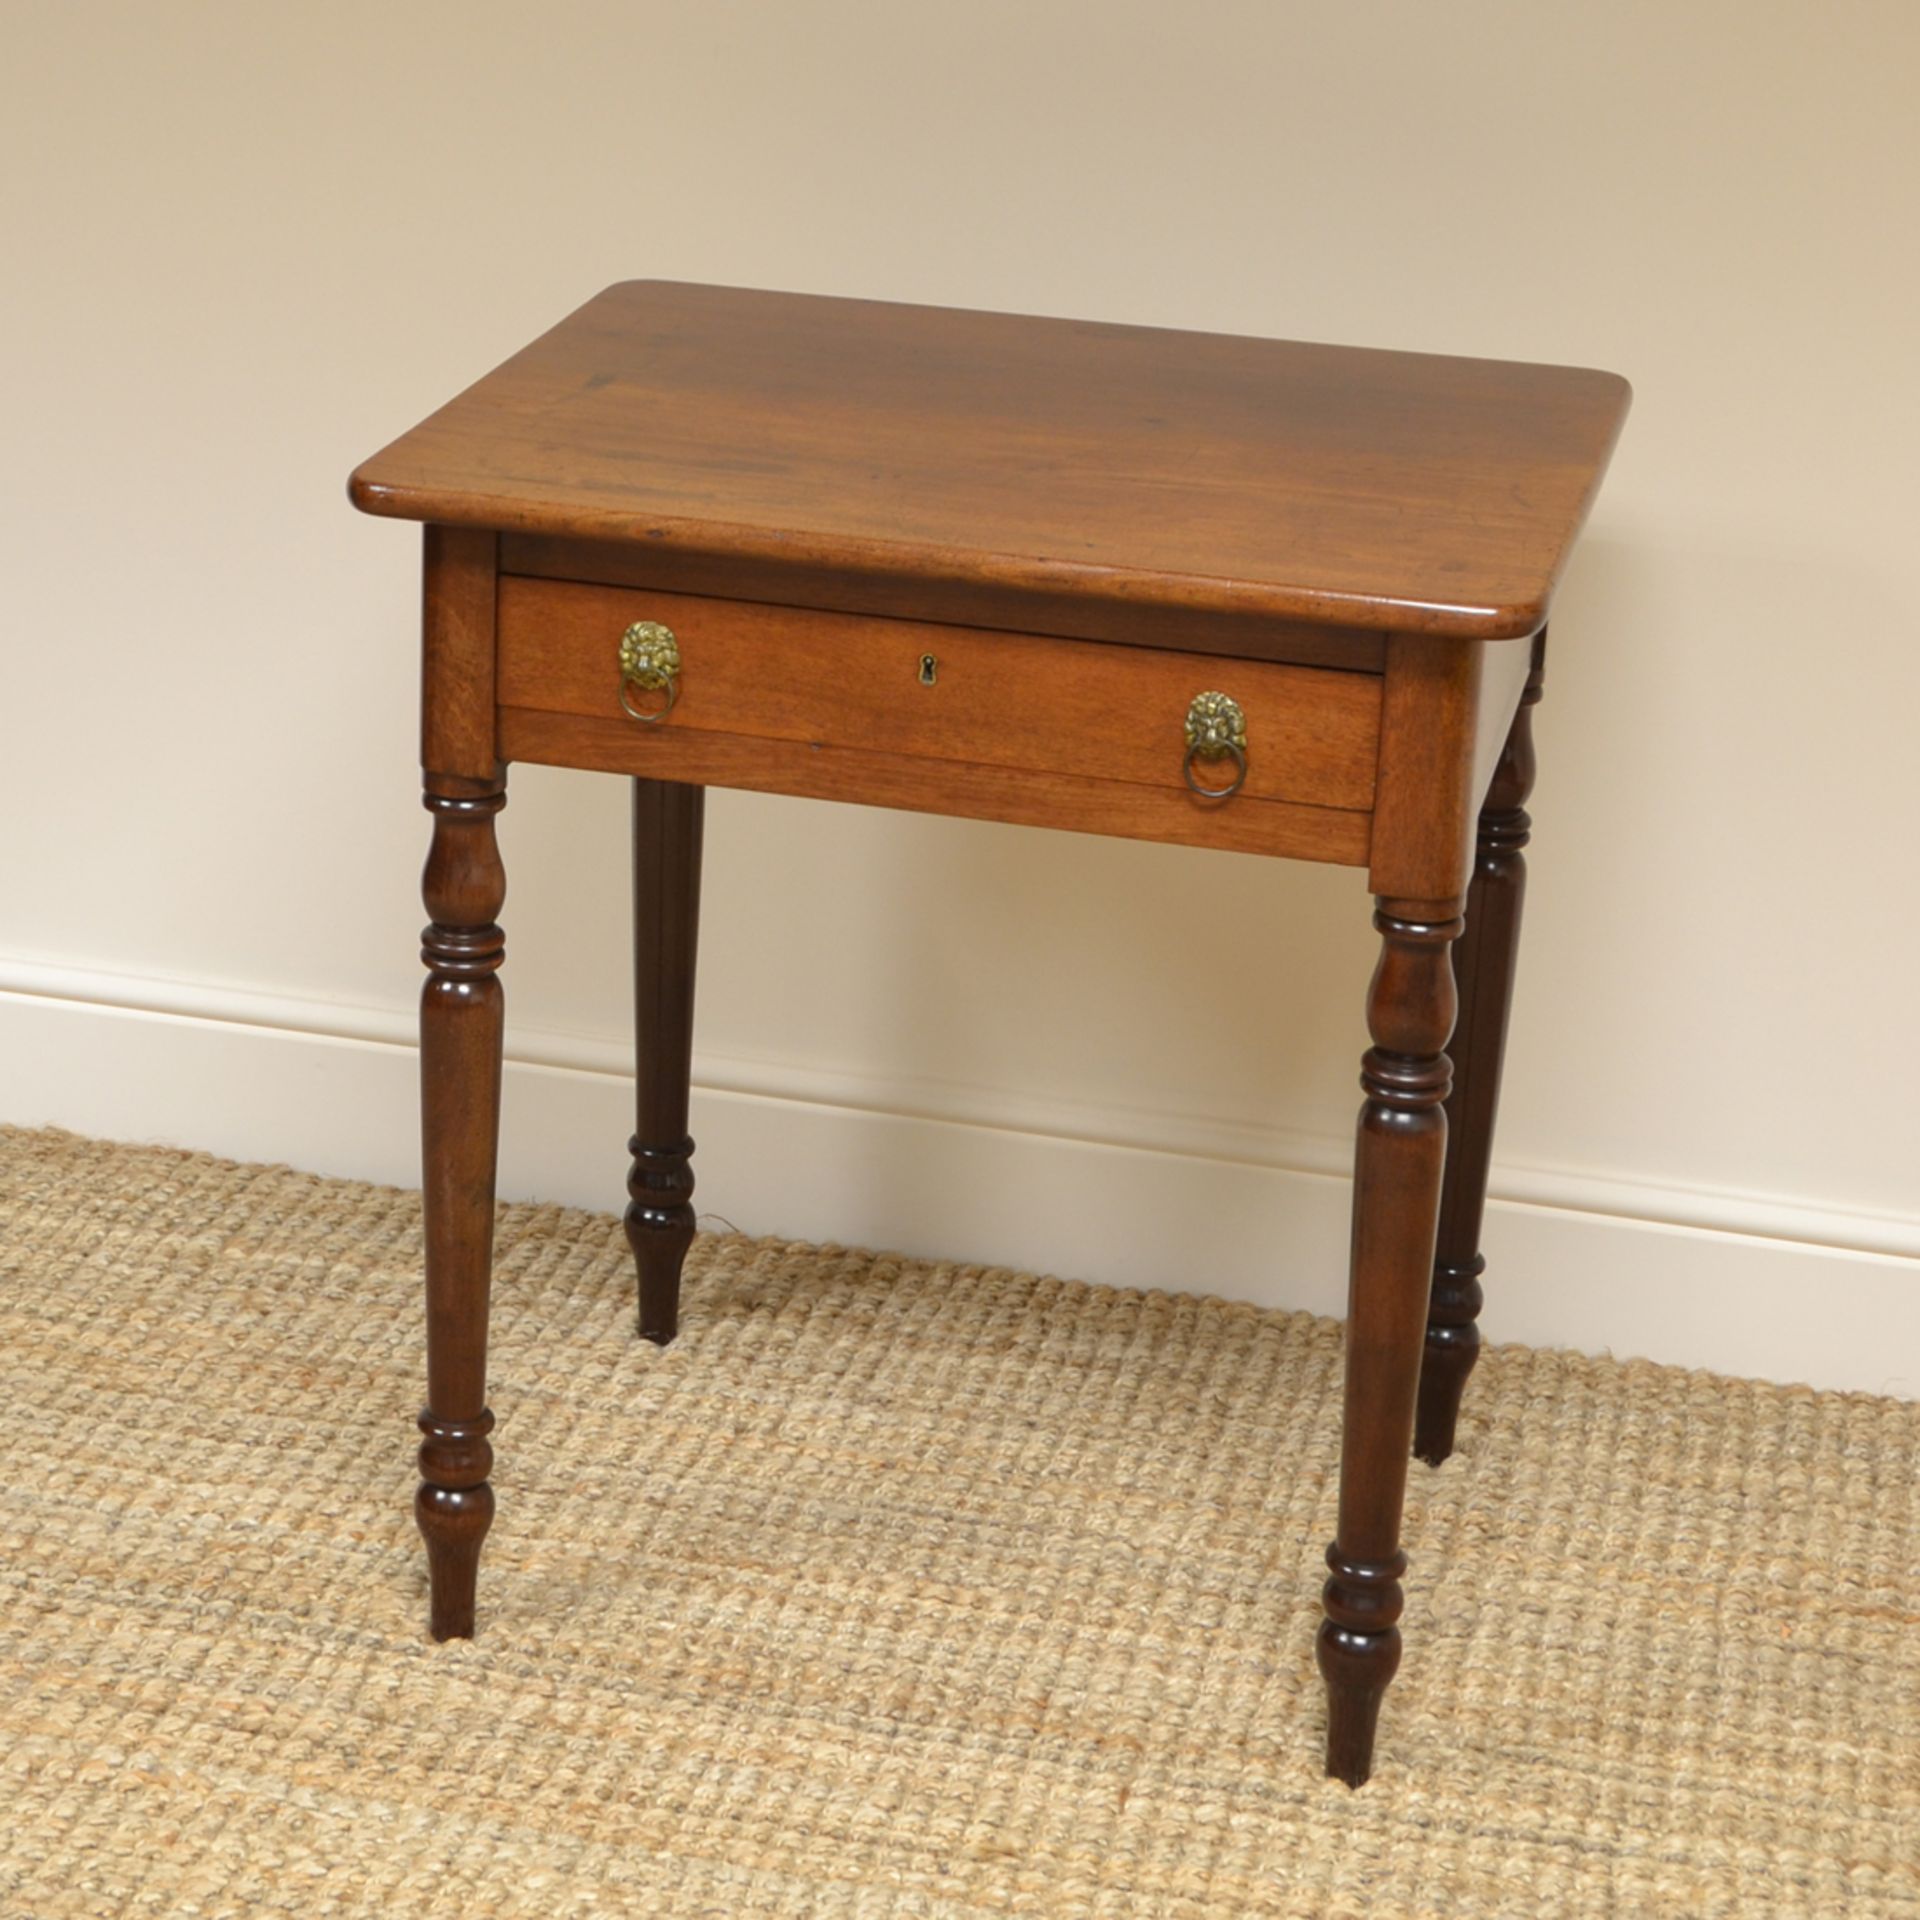 Regency Mahogany Antique Side Table - Image 7 of 7